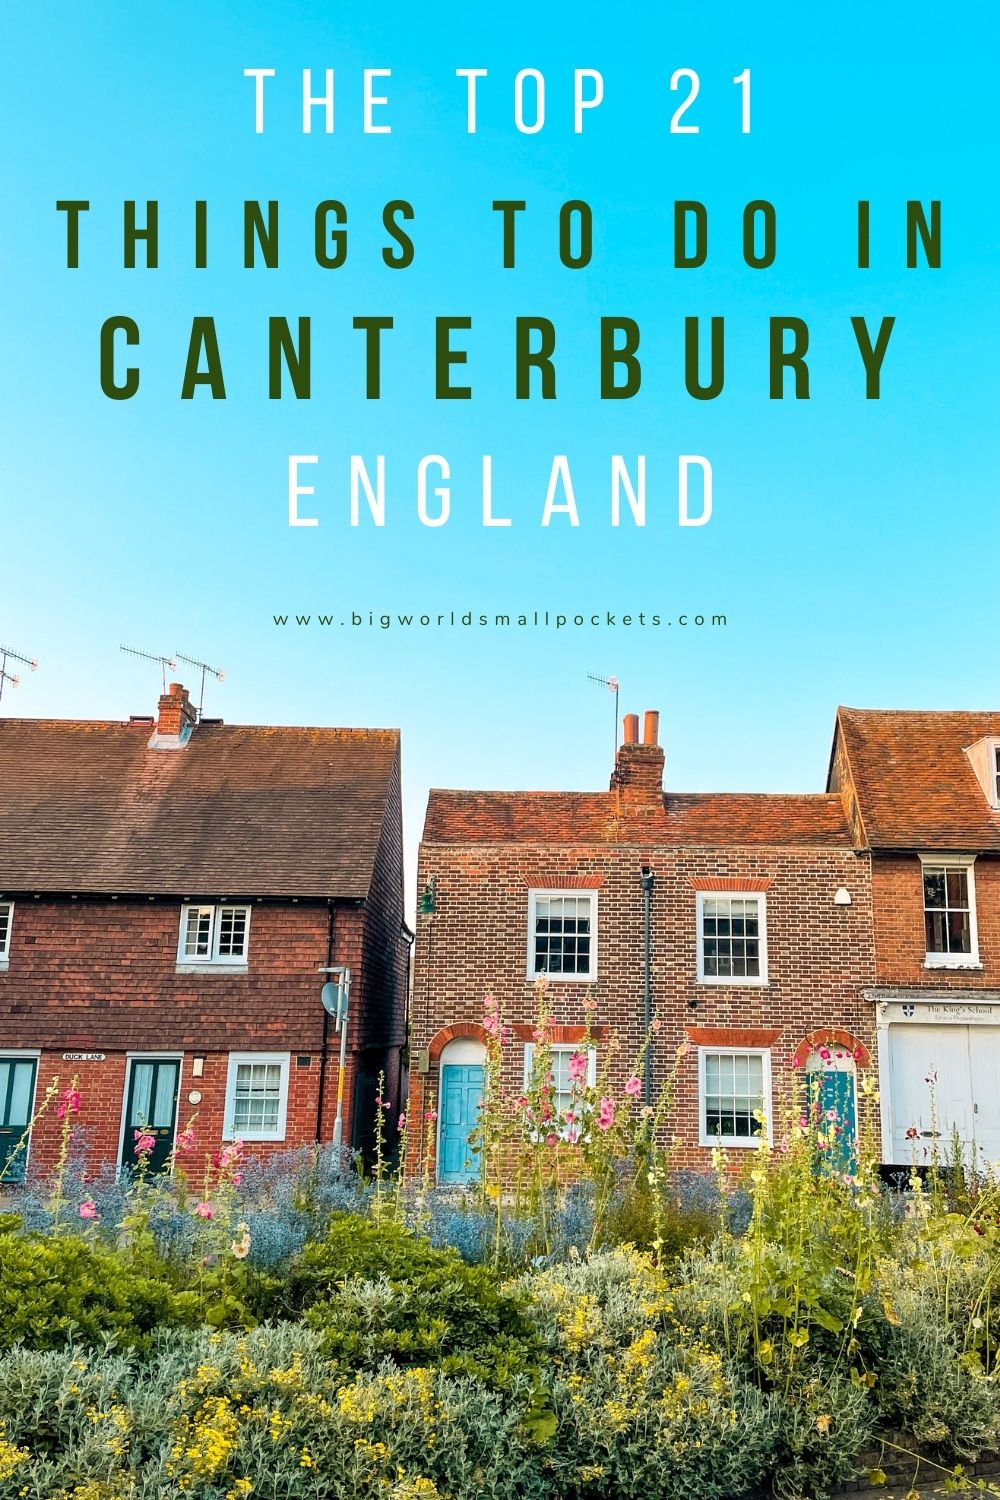 Top 21 Things To Do in Canterbury, England